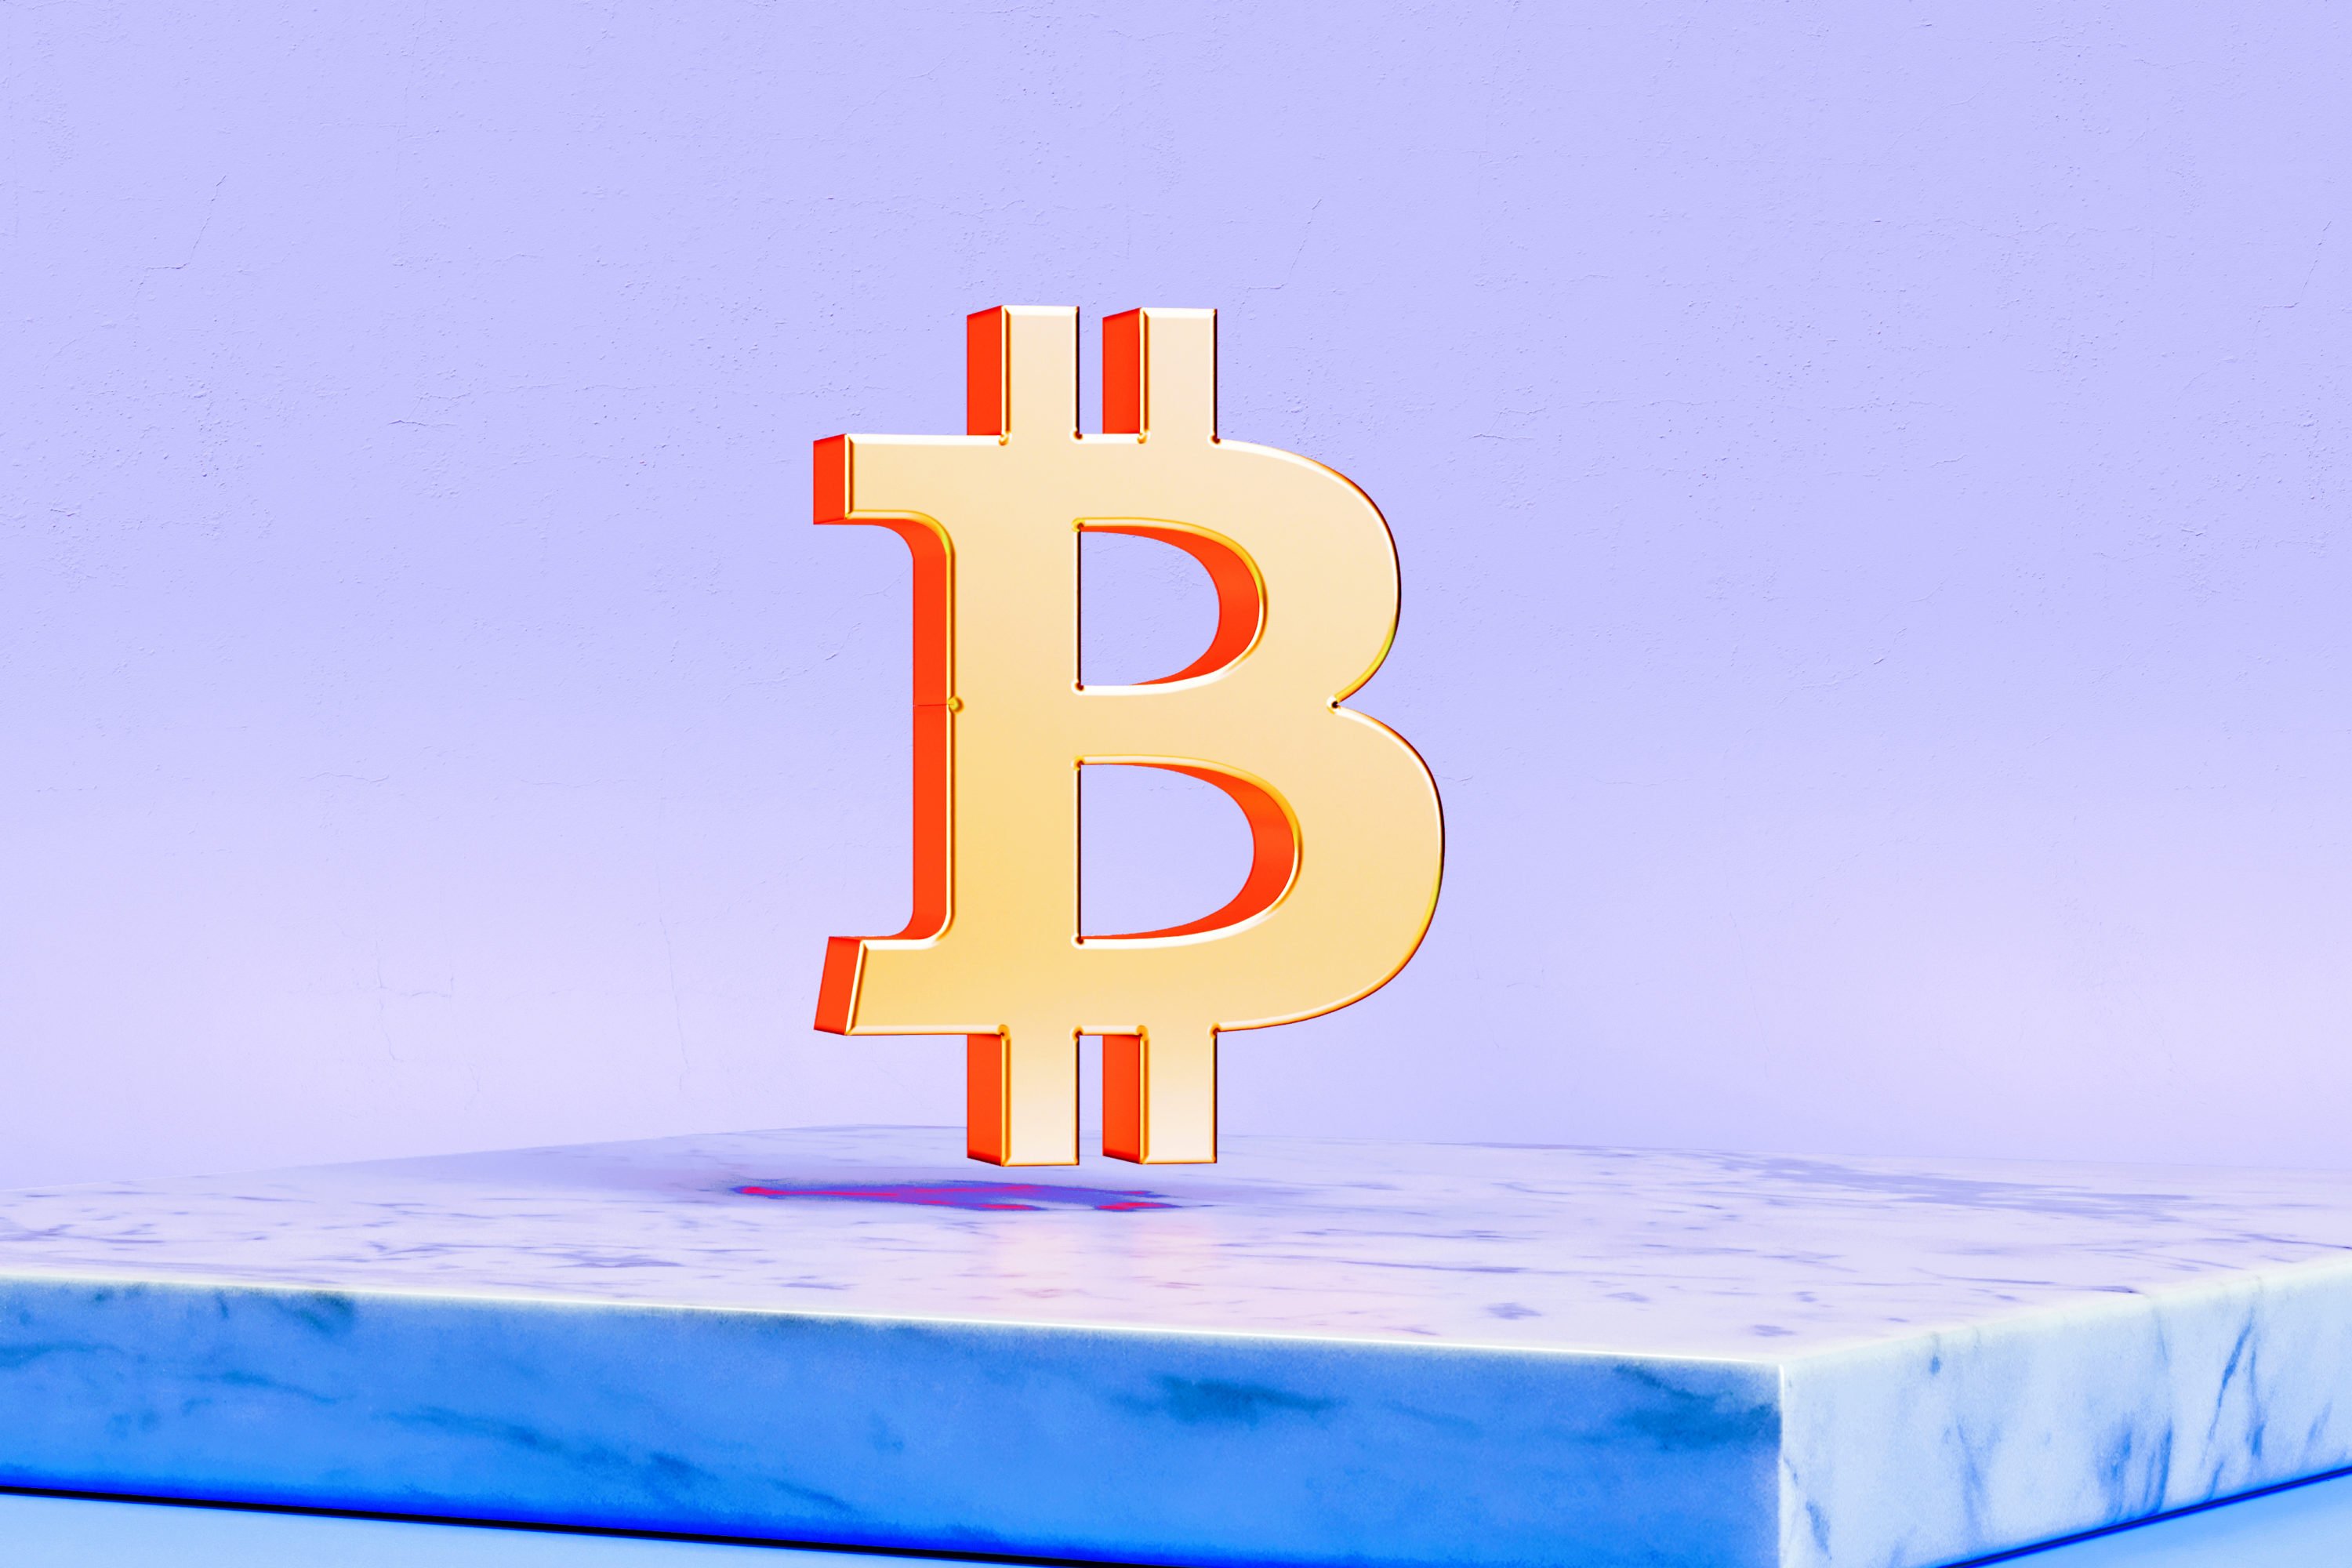  bitcoin cryptocurrency tidbits crypto another talks week 